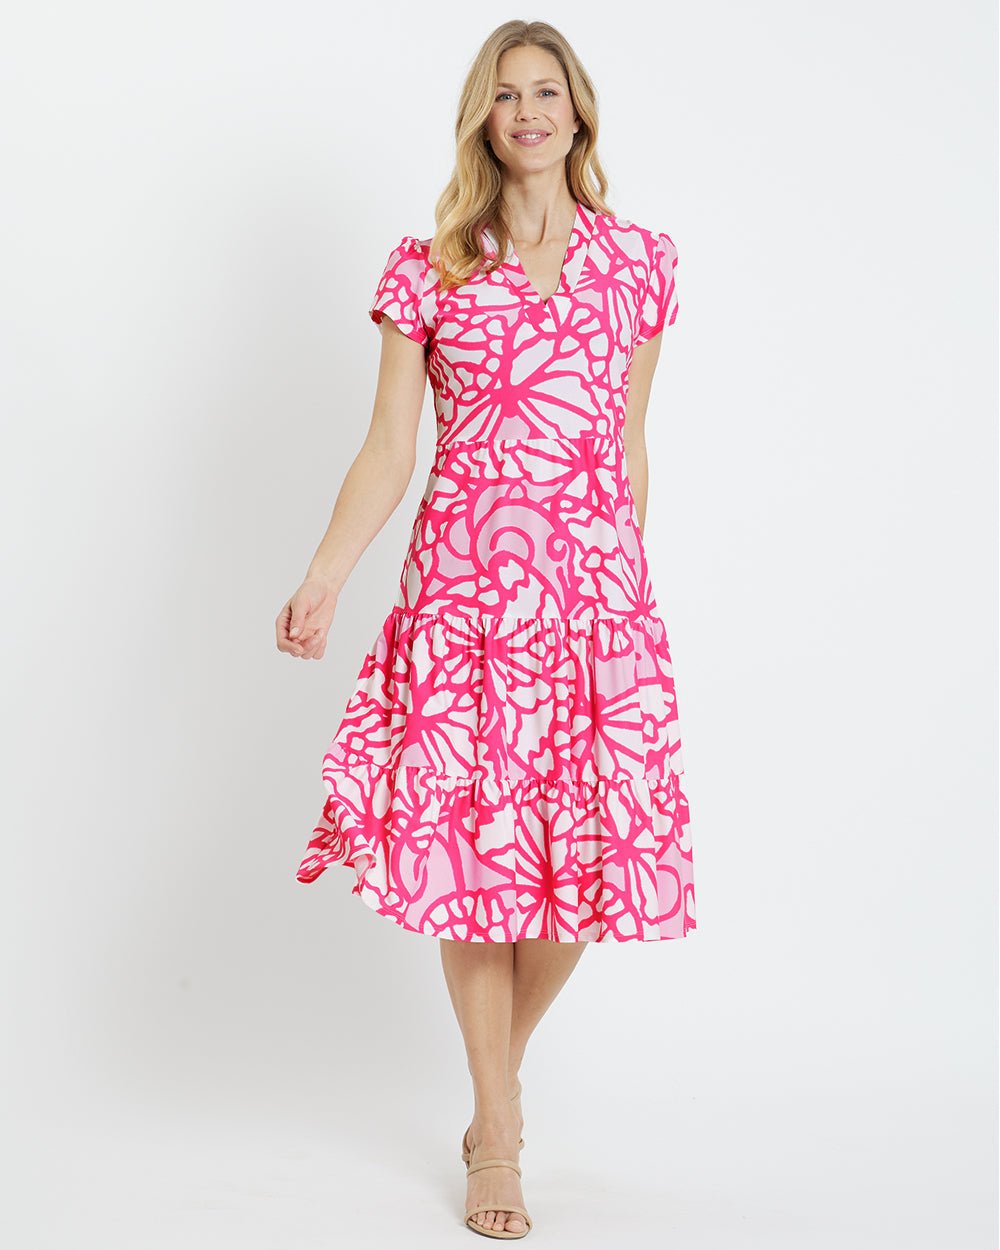 Jude Connally - Libby Grand Wings Dress: Light Pink - Shorely Chic Boutique